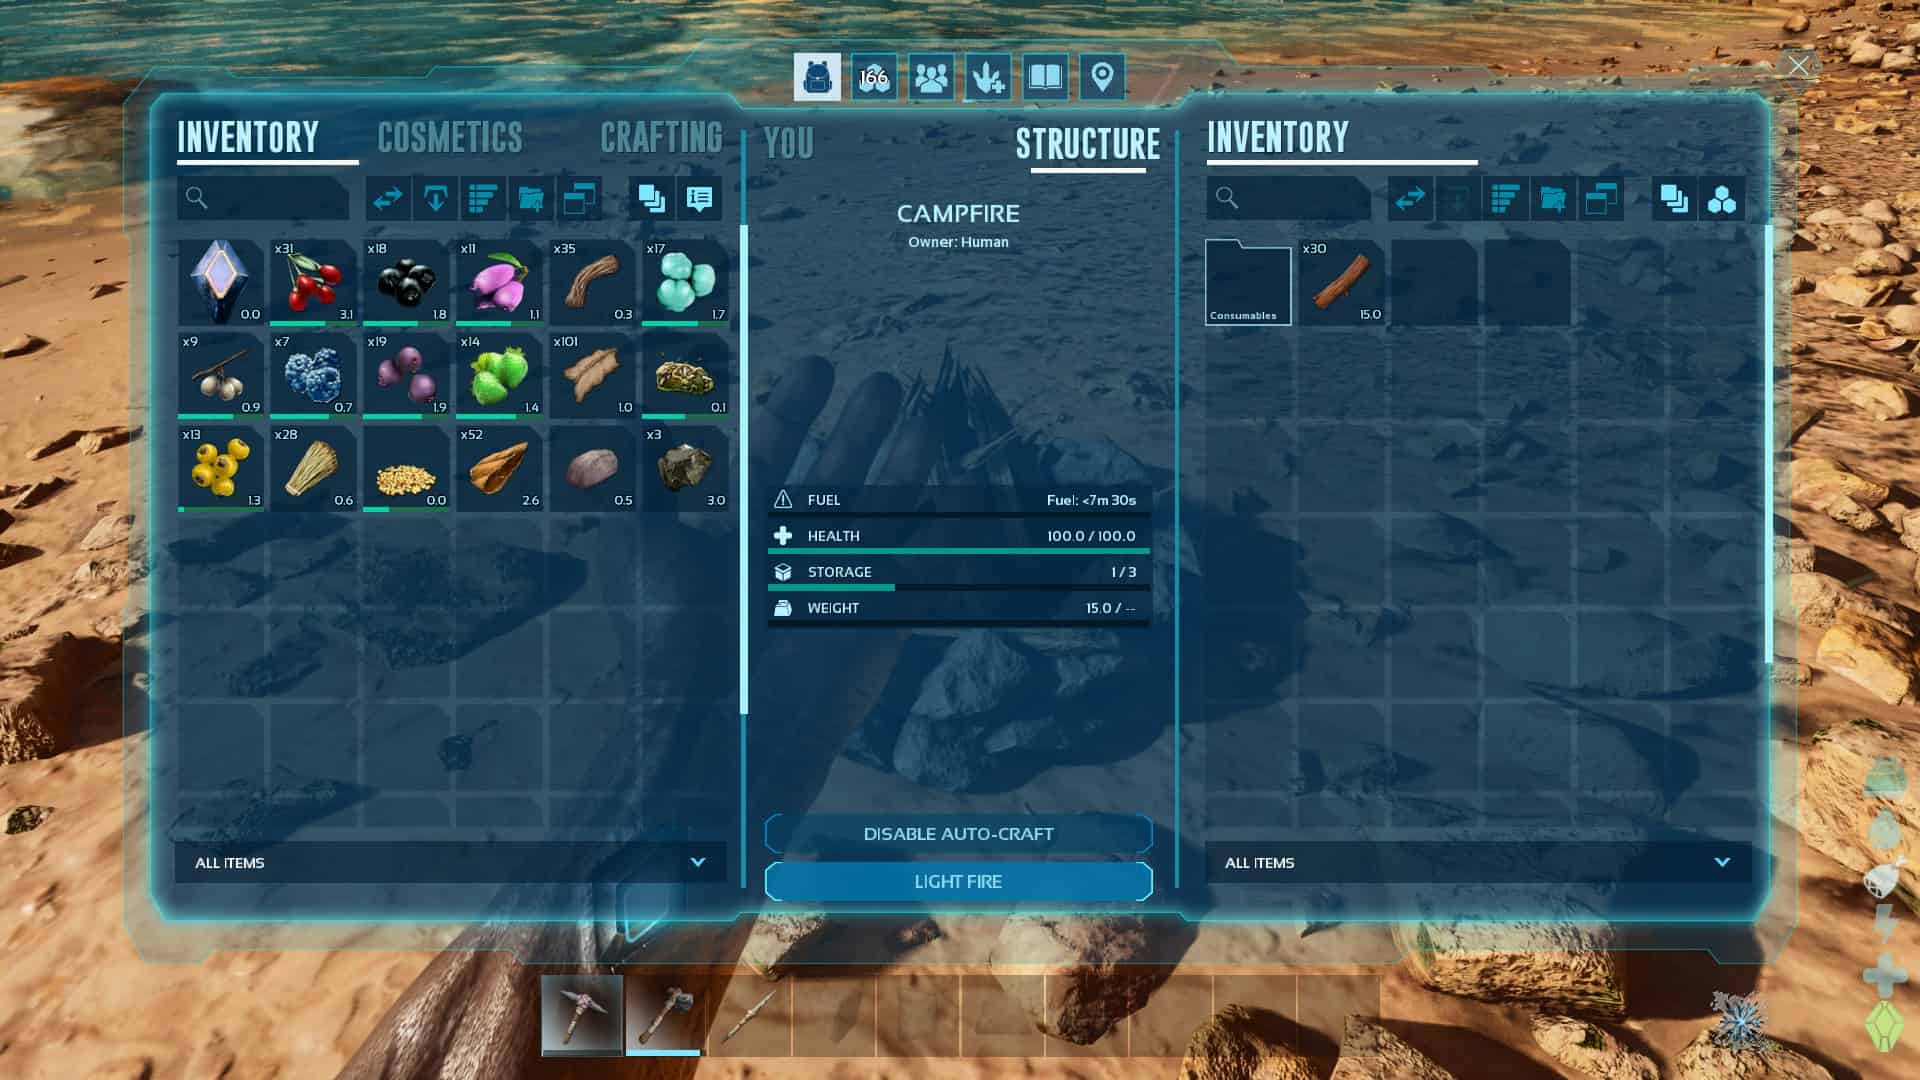 ARK Survival Ascended how to light campfire: Placing wood into the campfire inventory.